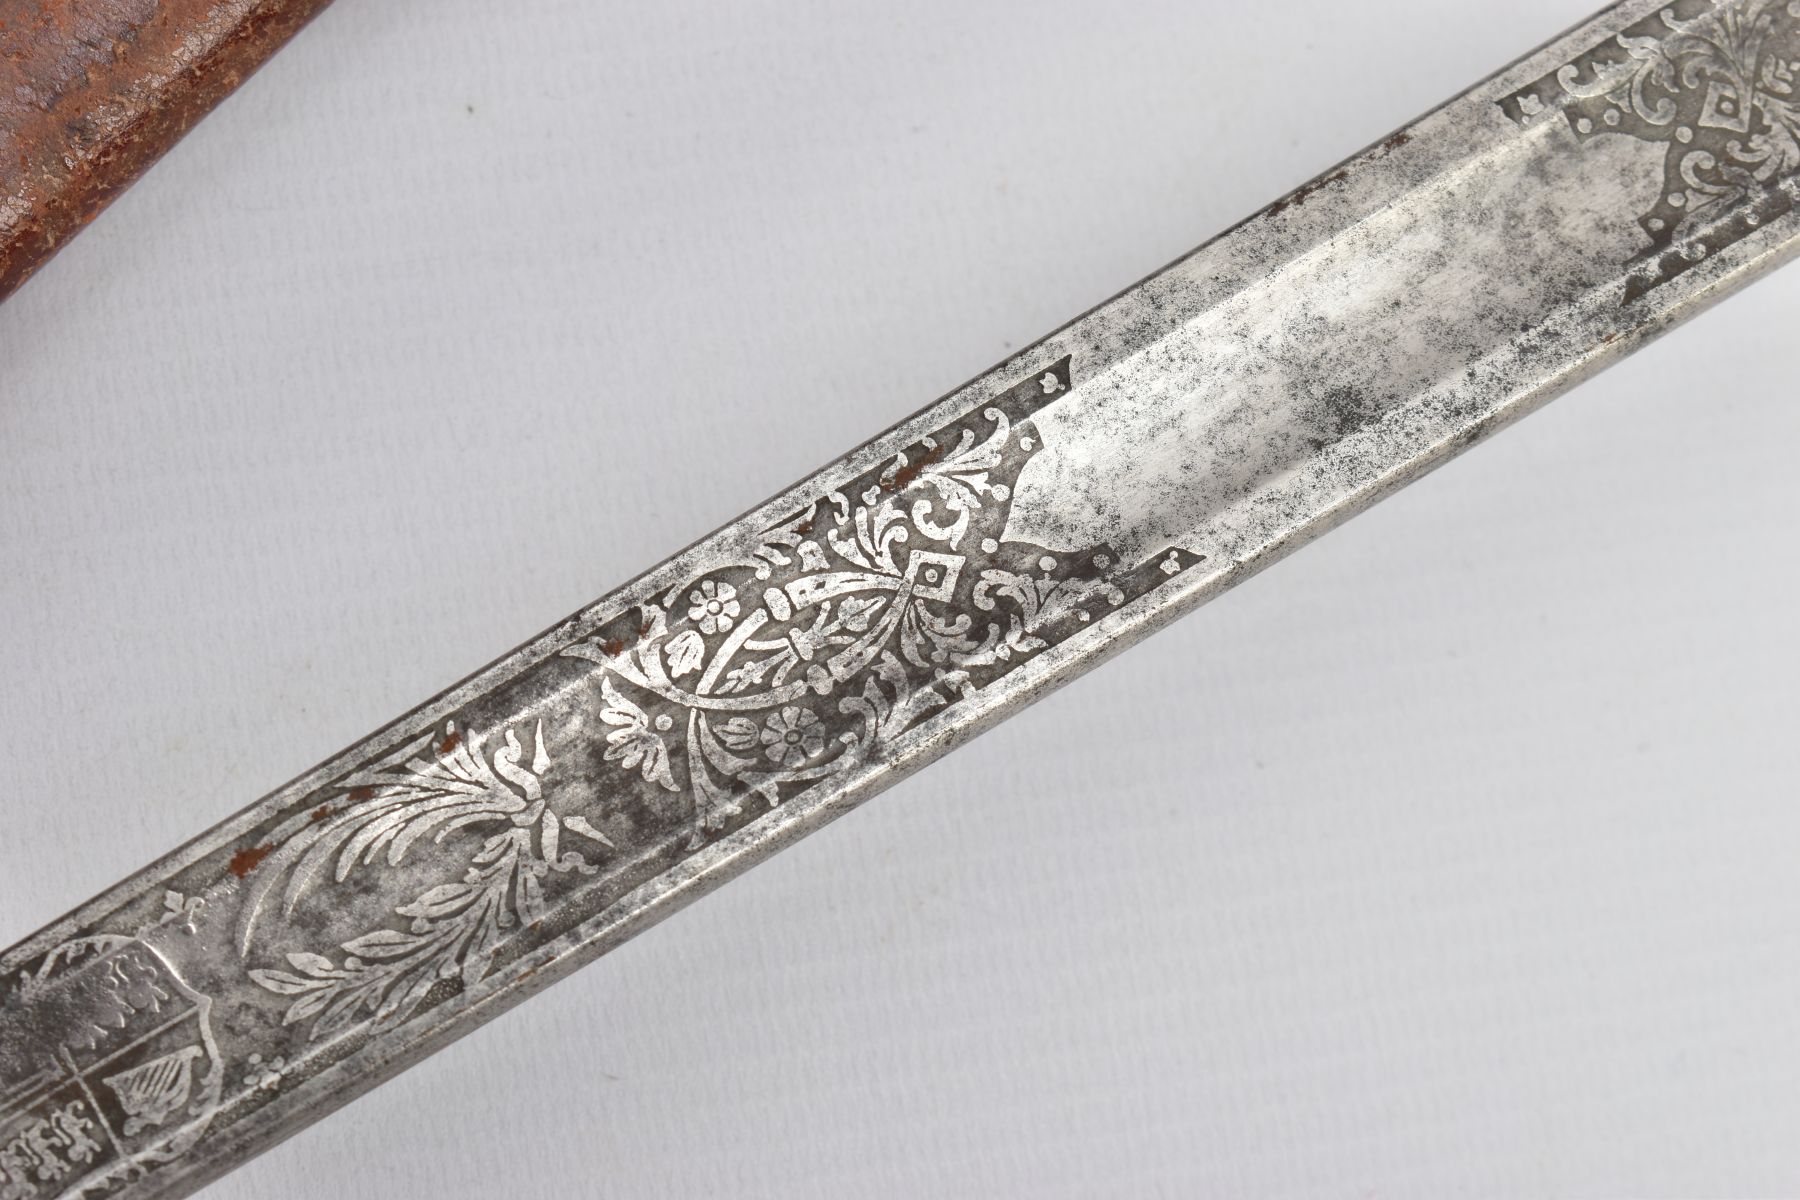 A FENTON BROTHERS LTD, SHEFFIELD 1897 PATTERN INFANTRY OFFICERS SWORD AND SCABBARD, the blade is - Image 4 of 15